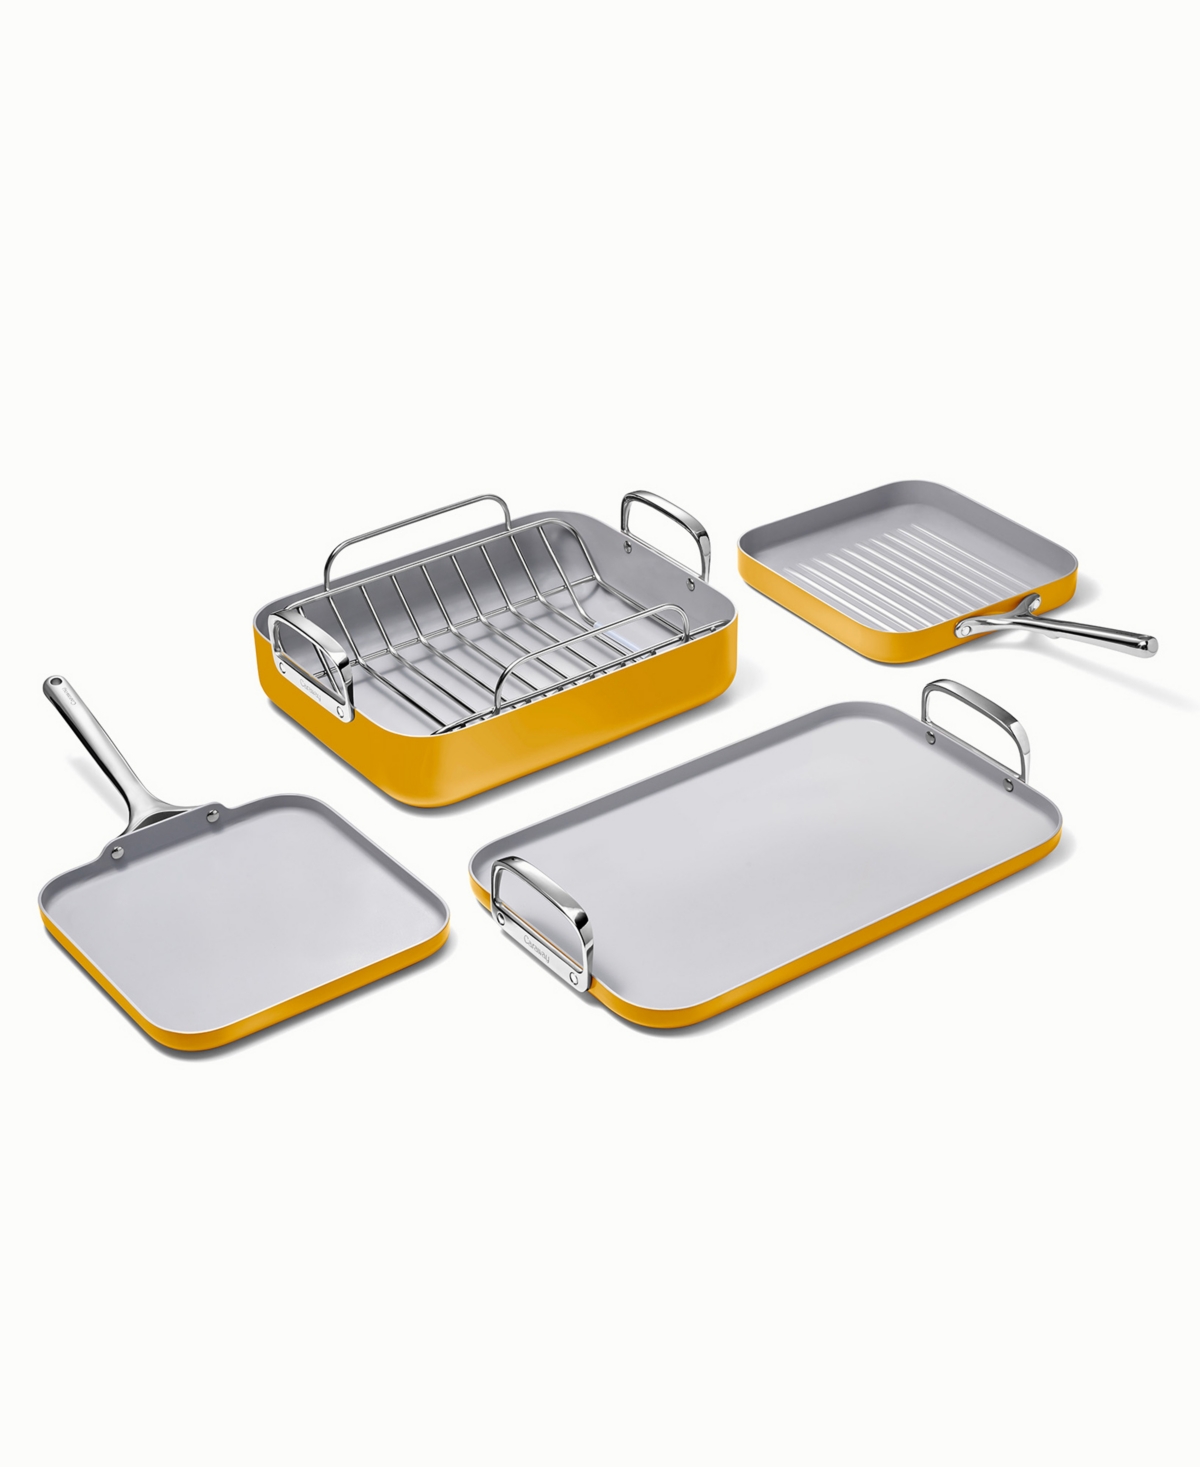 Caraway Harmless Ceramic-coated Non-stick 4-piece Square Cookware Set In Yellow